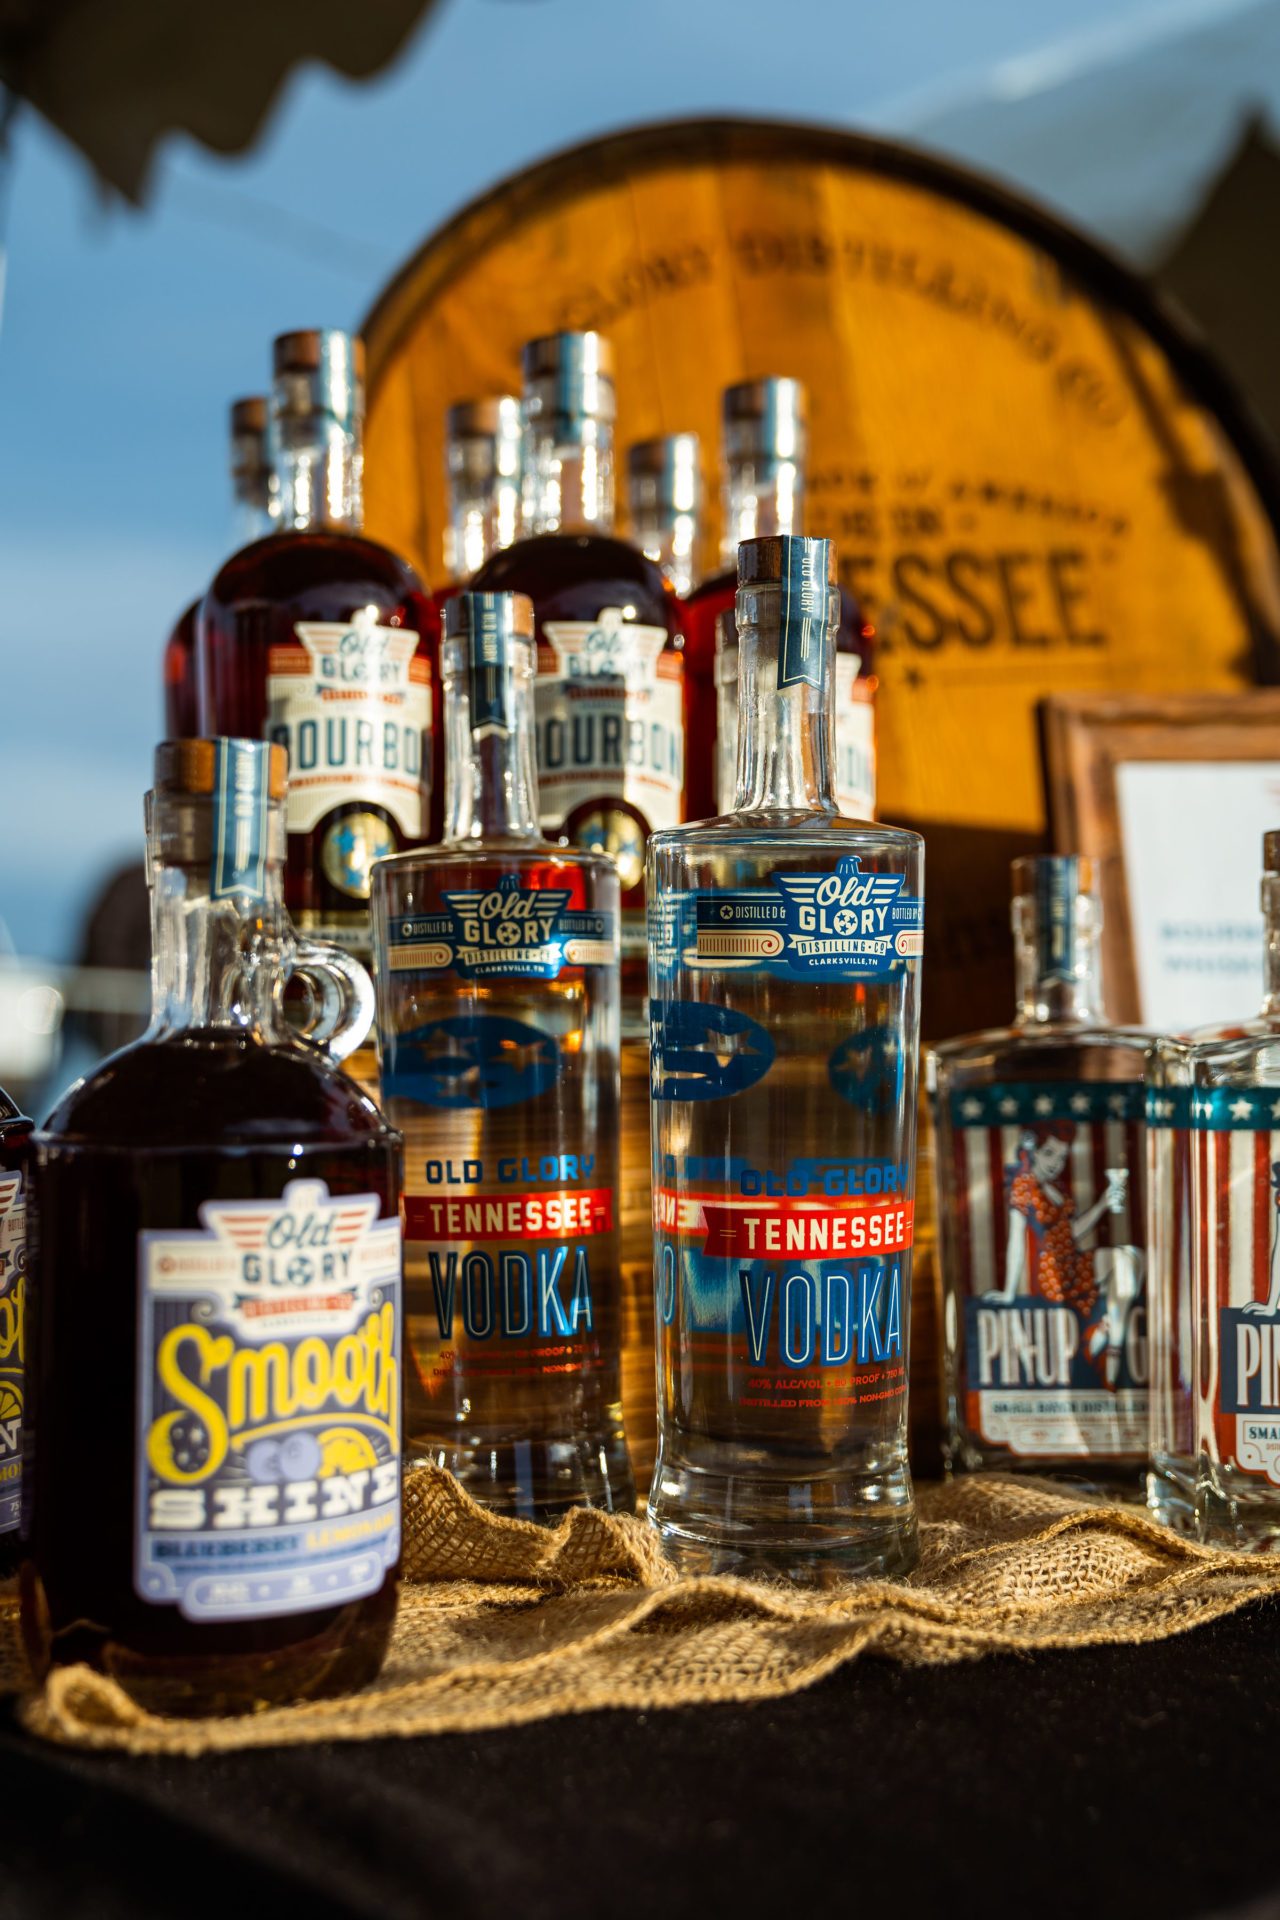 Close-up event photography of bottles of Old Glory liquor.